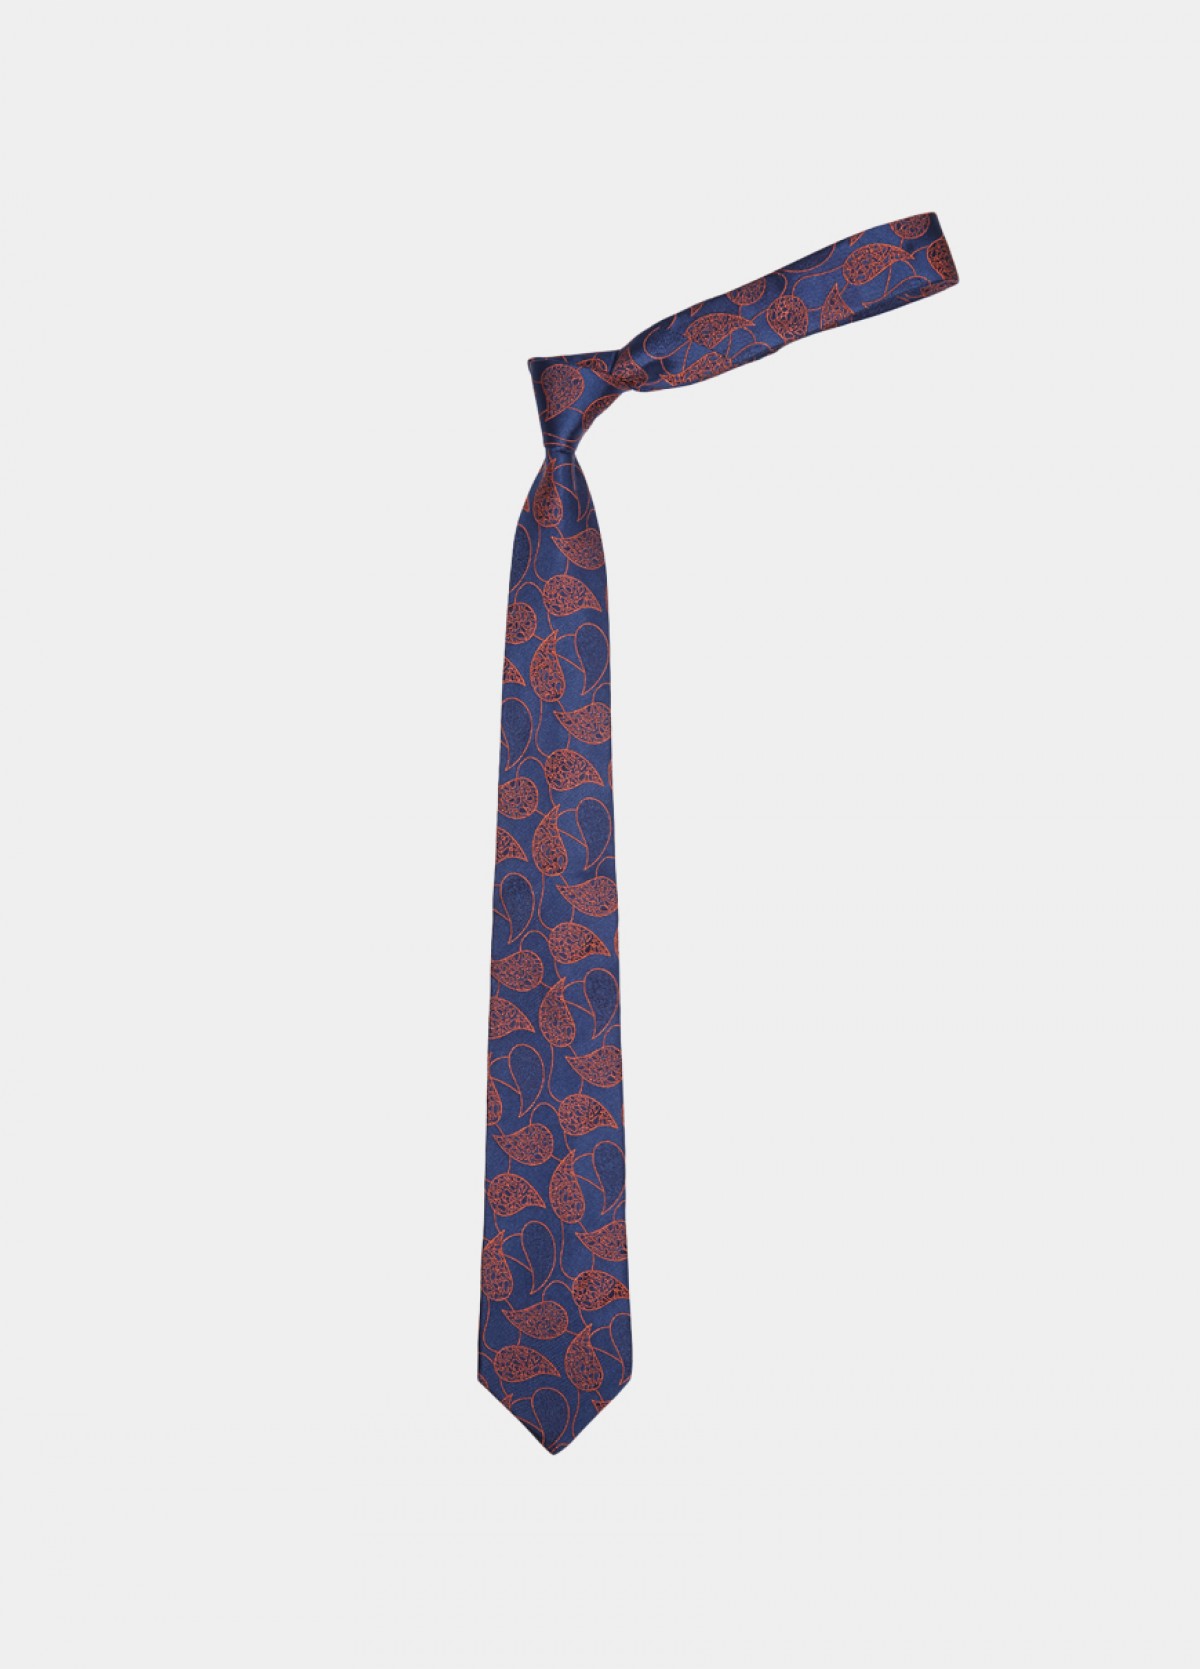 The Silk Stain Resistant Tie